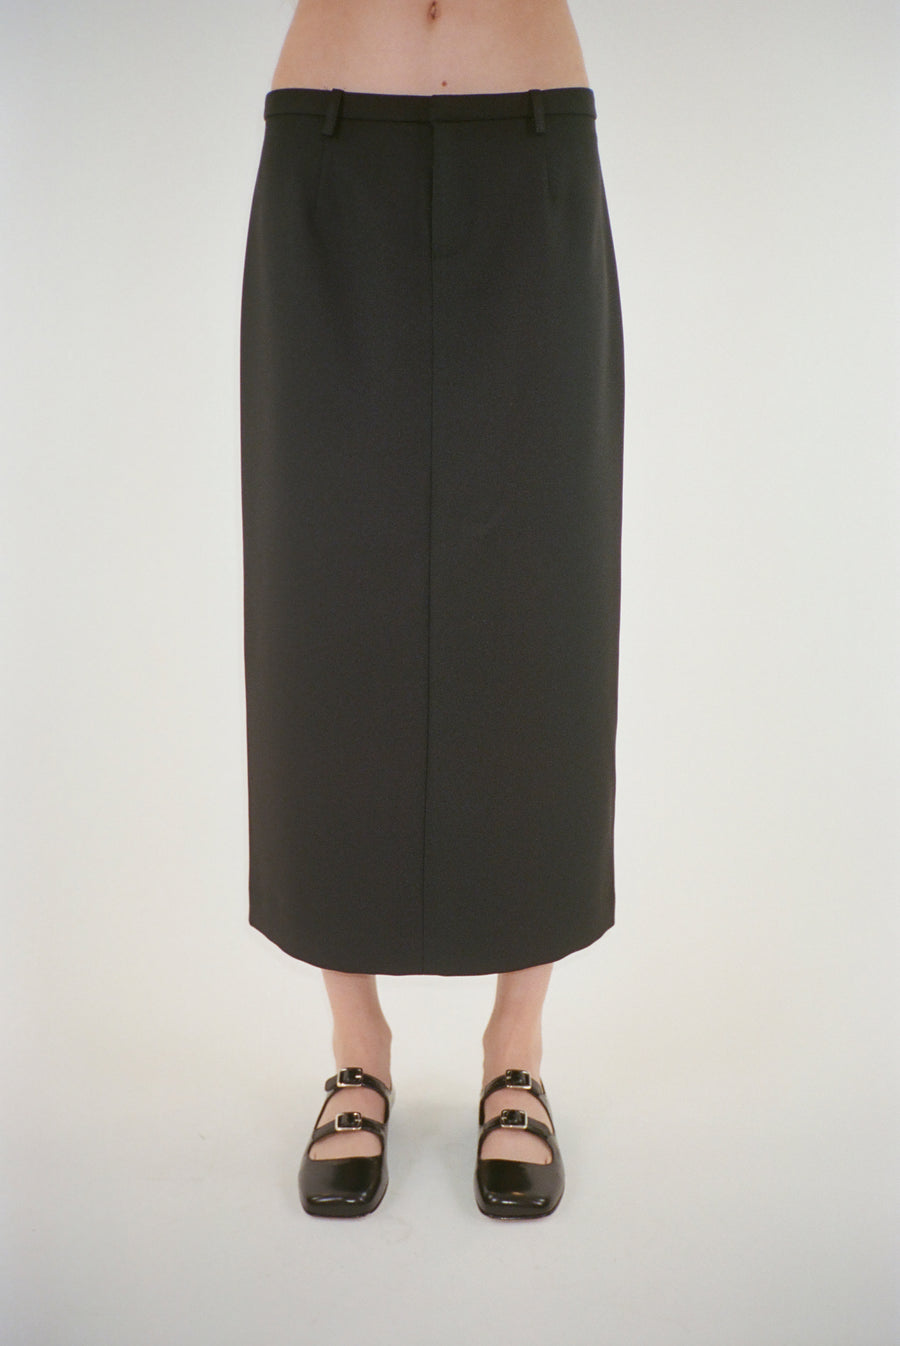 Midi length skirt in black suiting fabric on model